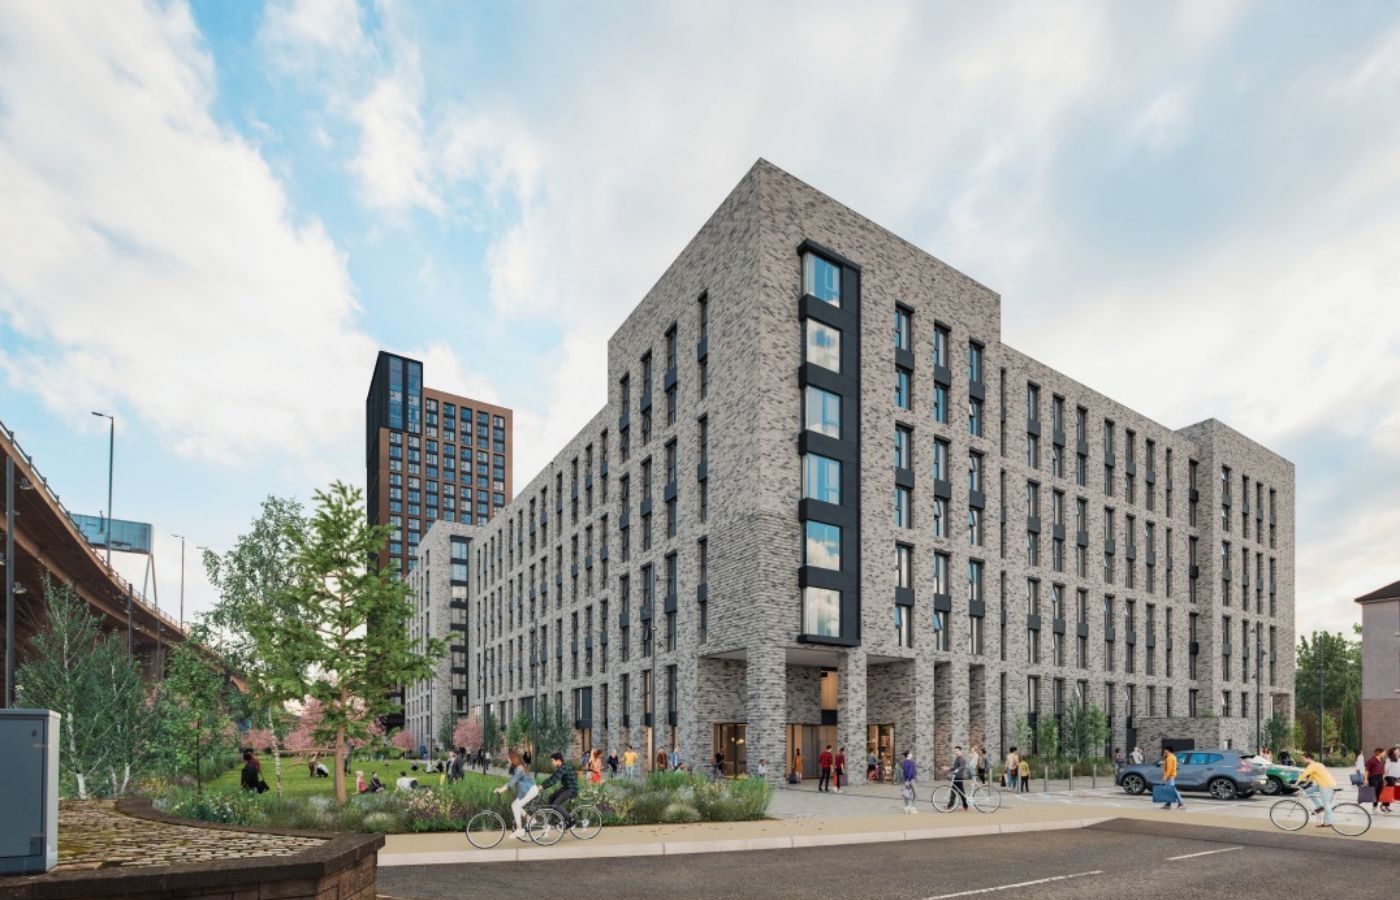 The proposals include both student accommodation and private rented flats.